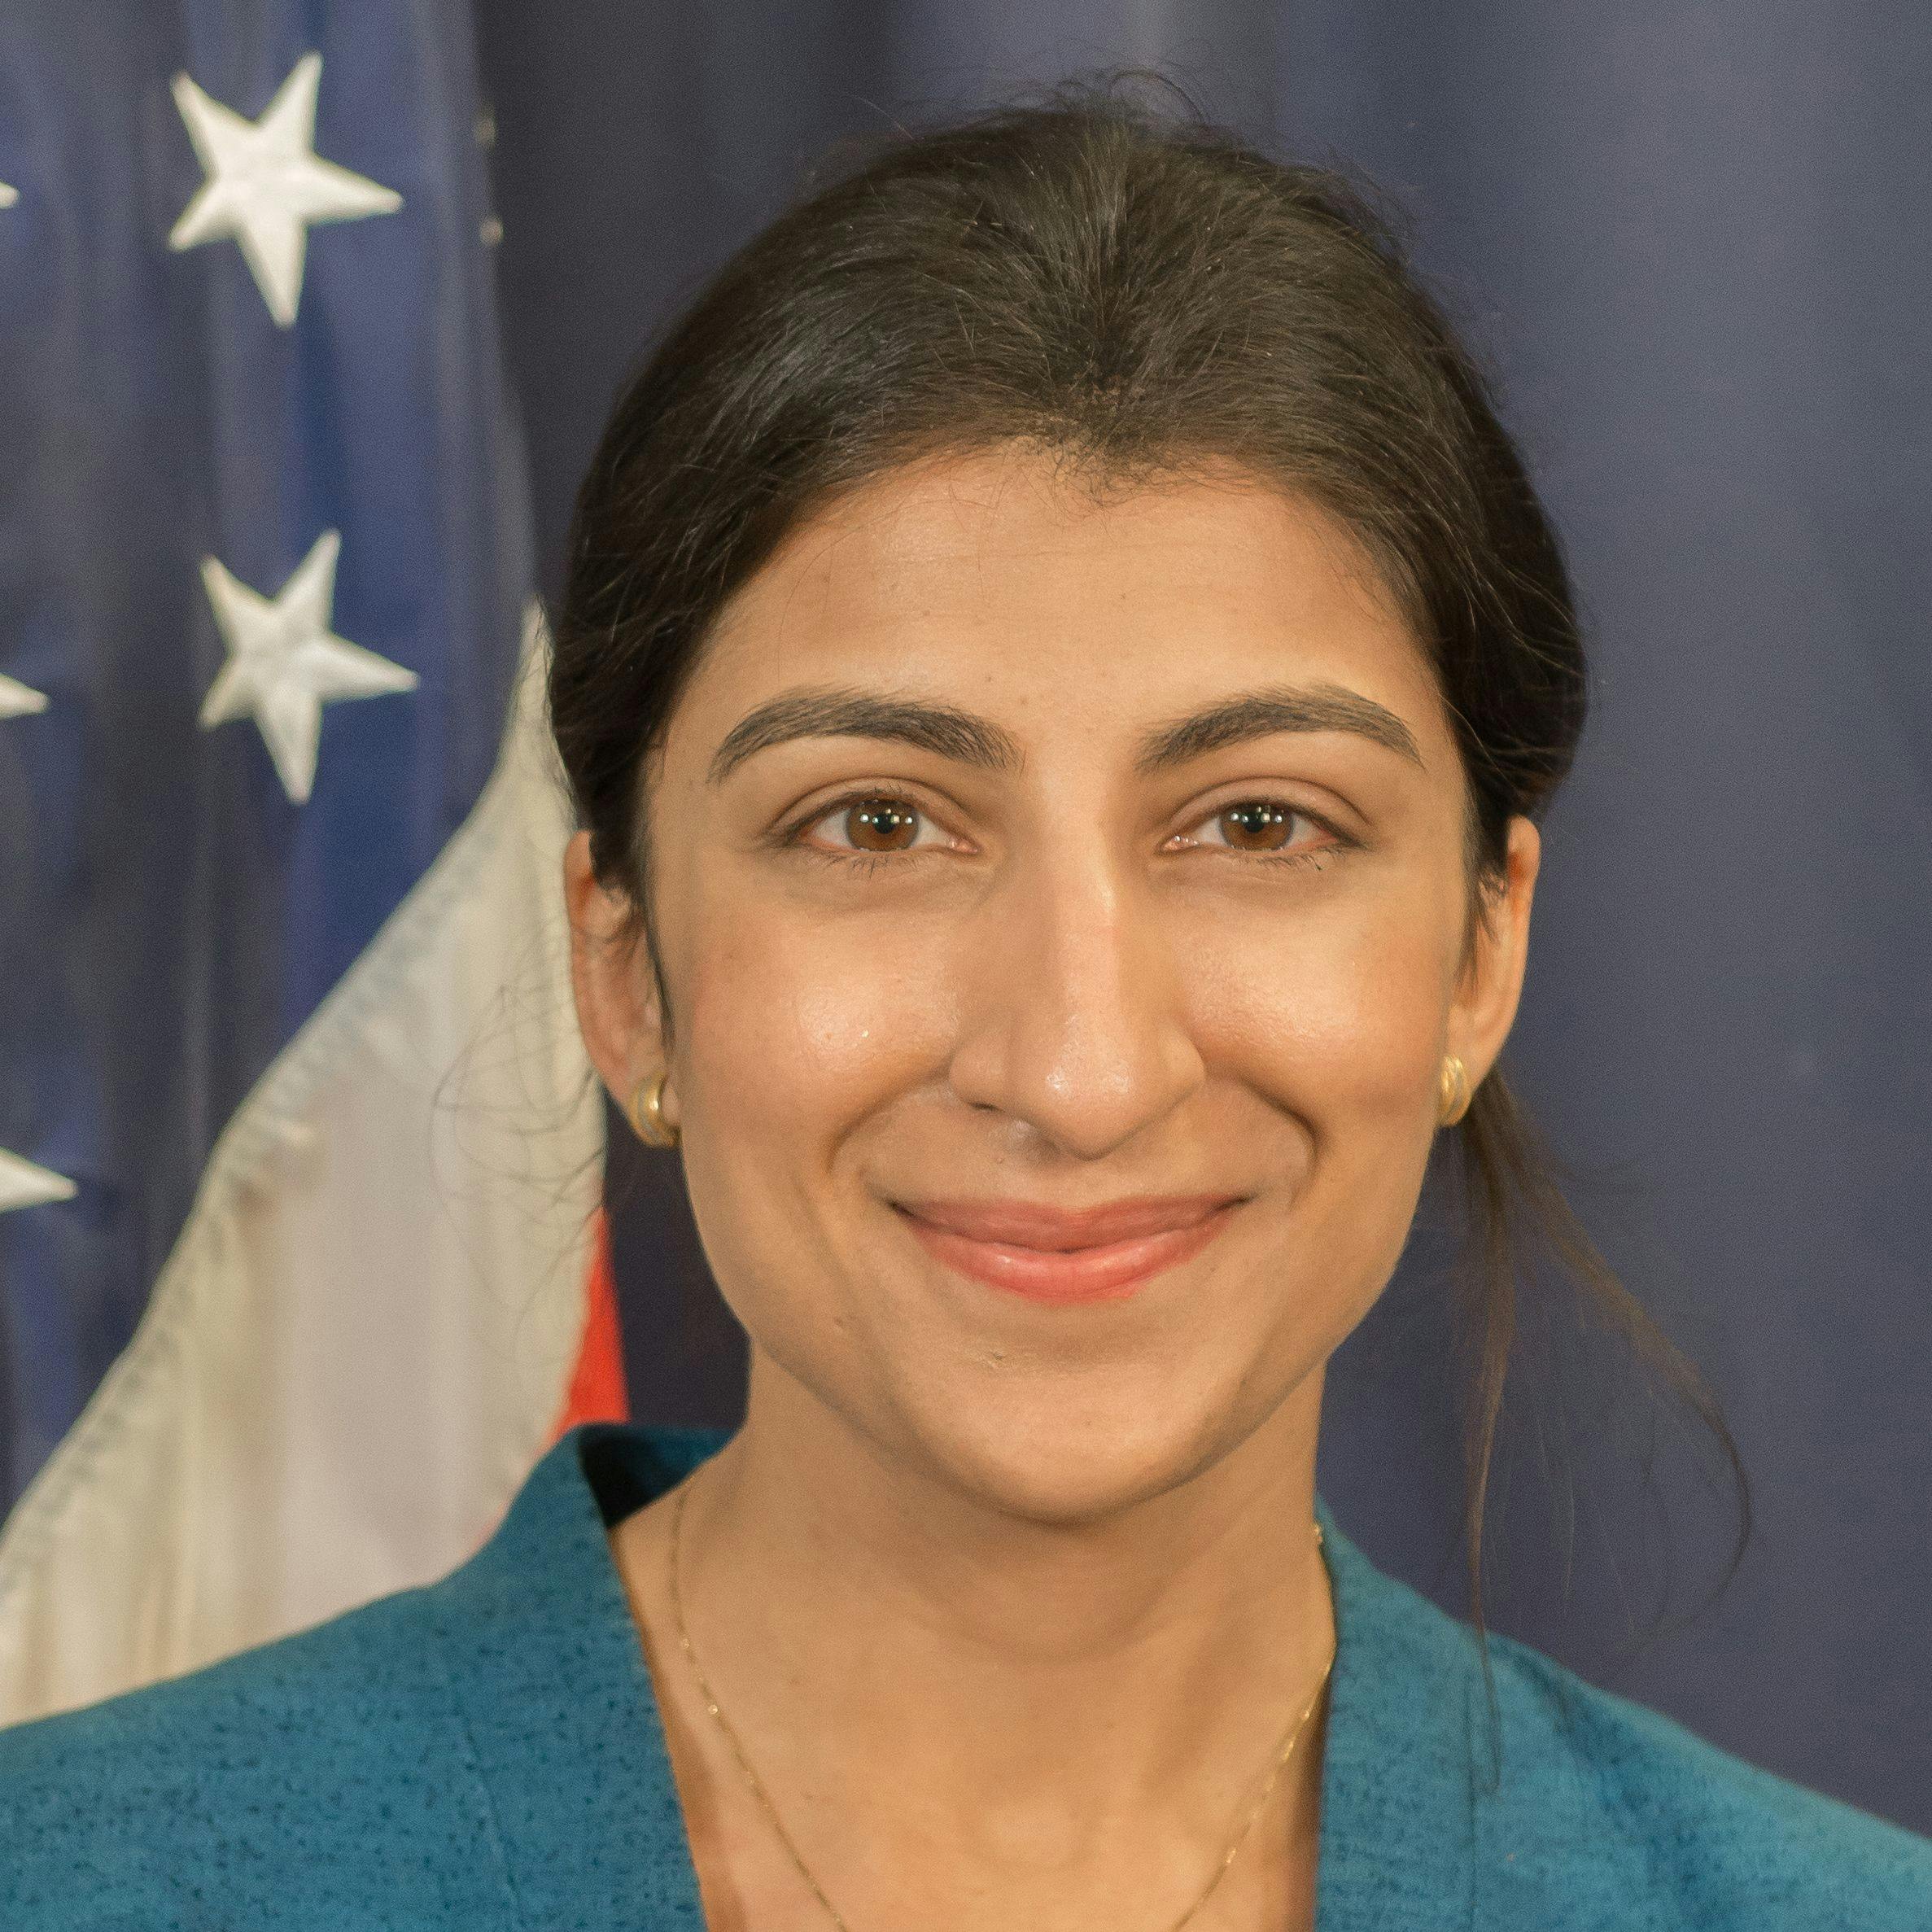 Lina Khan, chairwoman of the Federal Trade Commission, says regulators need to get more information to review mergers for competition issues. (Photo: FTC)